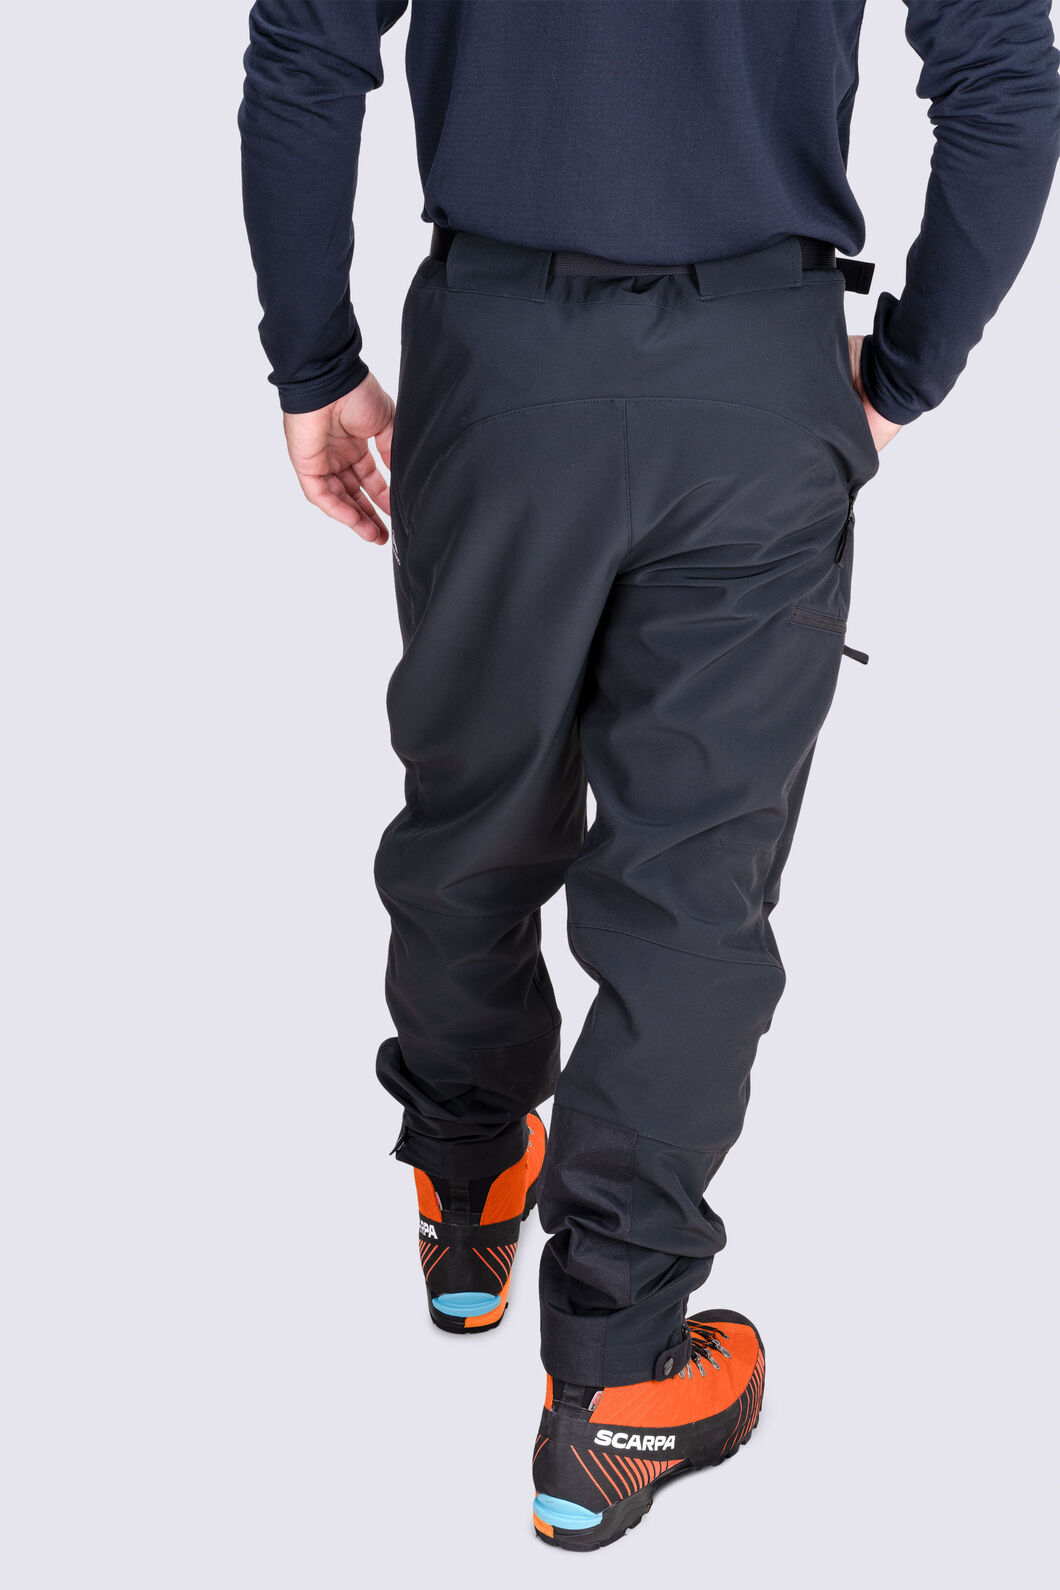 2023 New Men's Fishing Pants Autumn Winter Warm Breathable Cold Resistant  Soft Shell Waterproof Fishing Pants